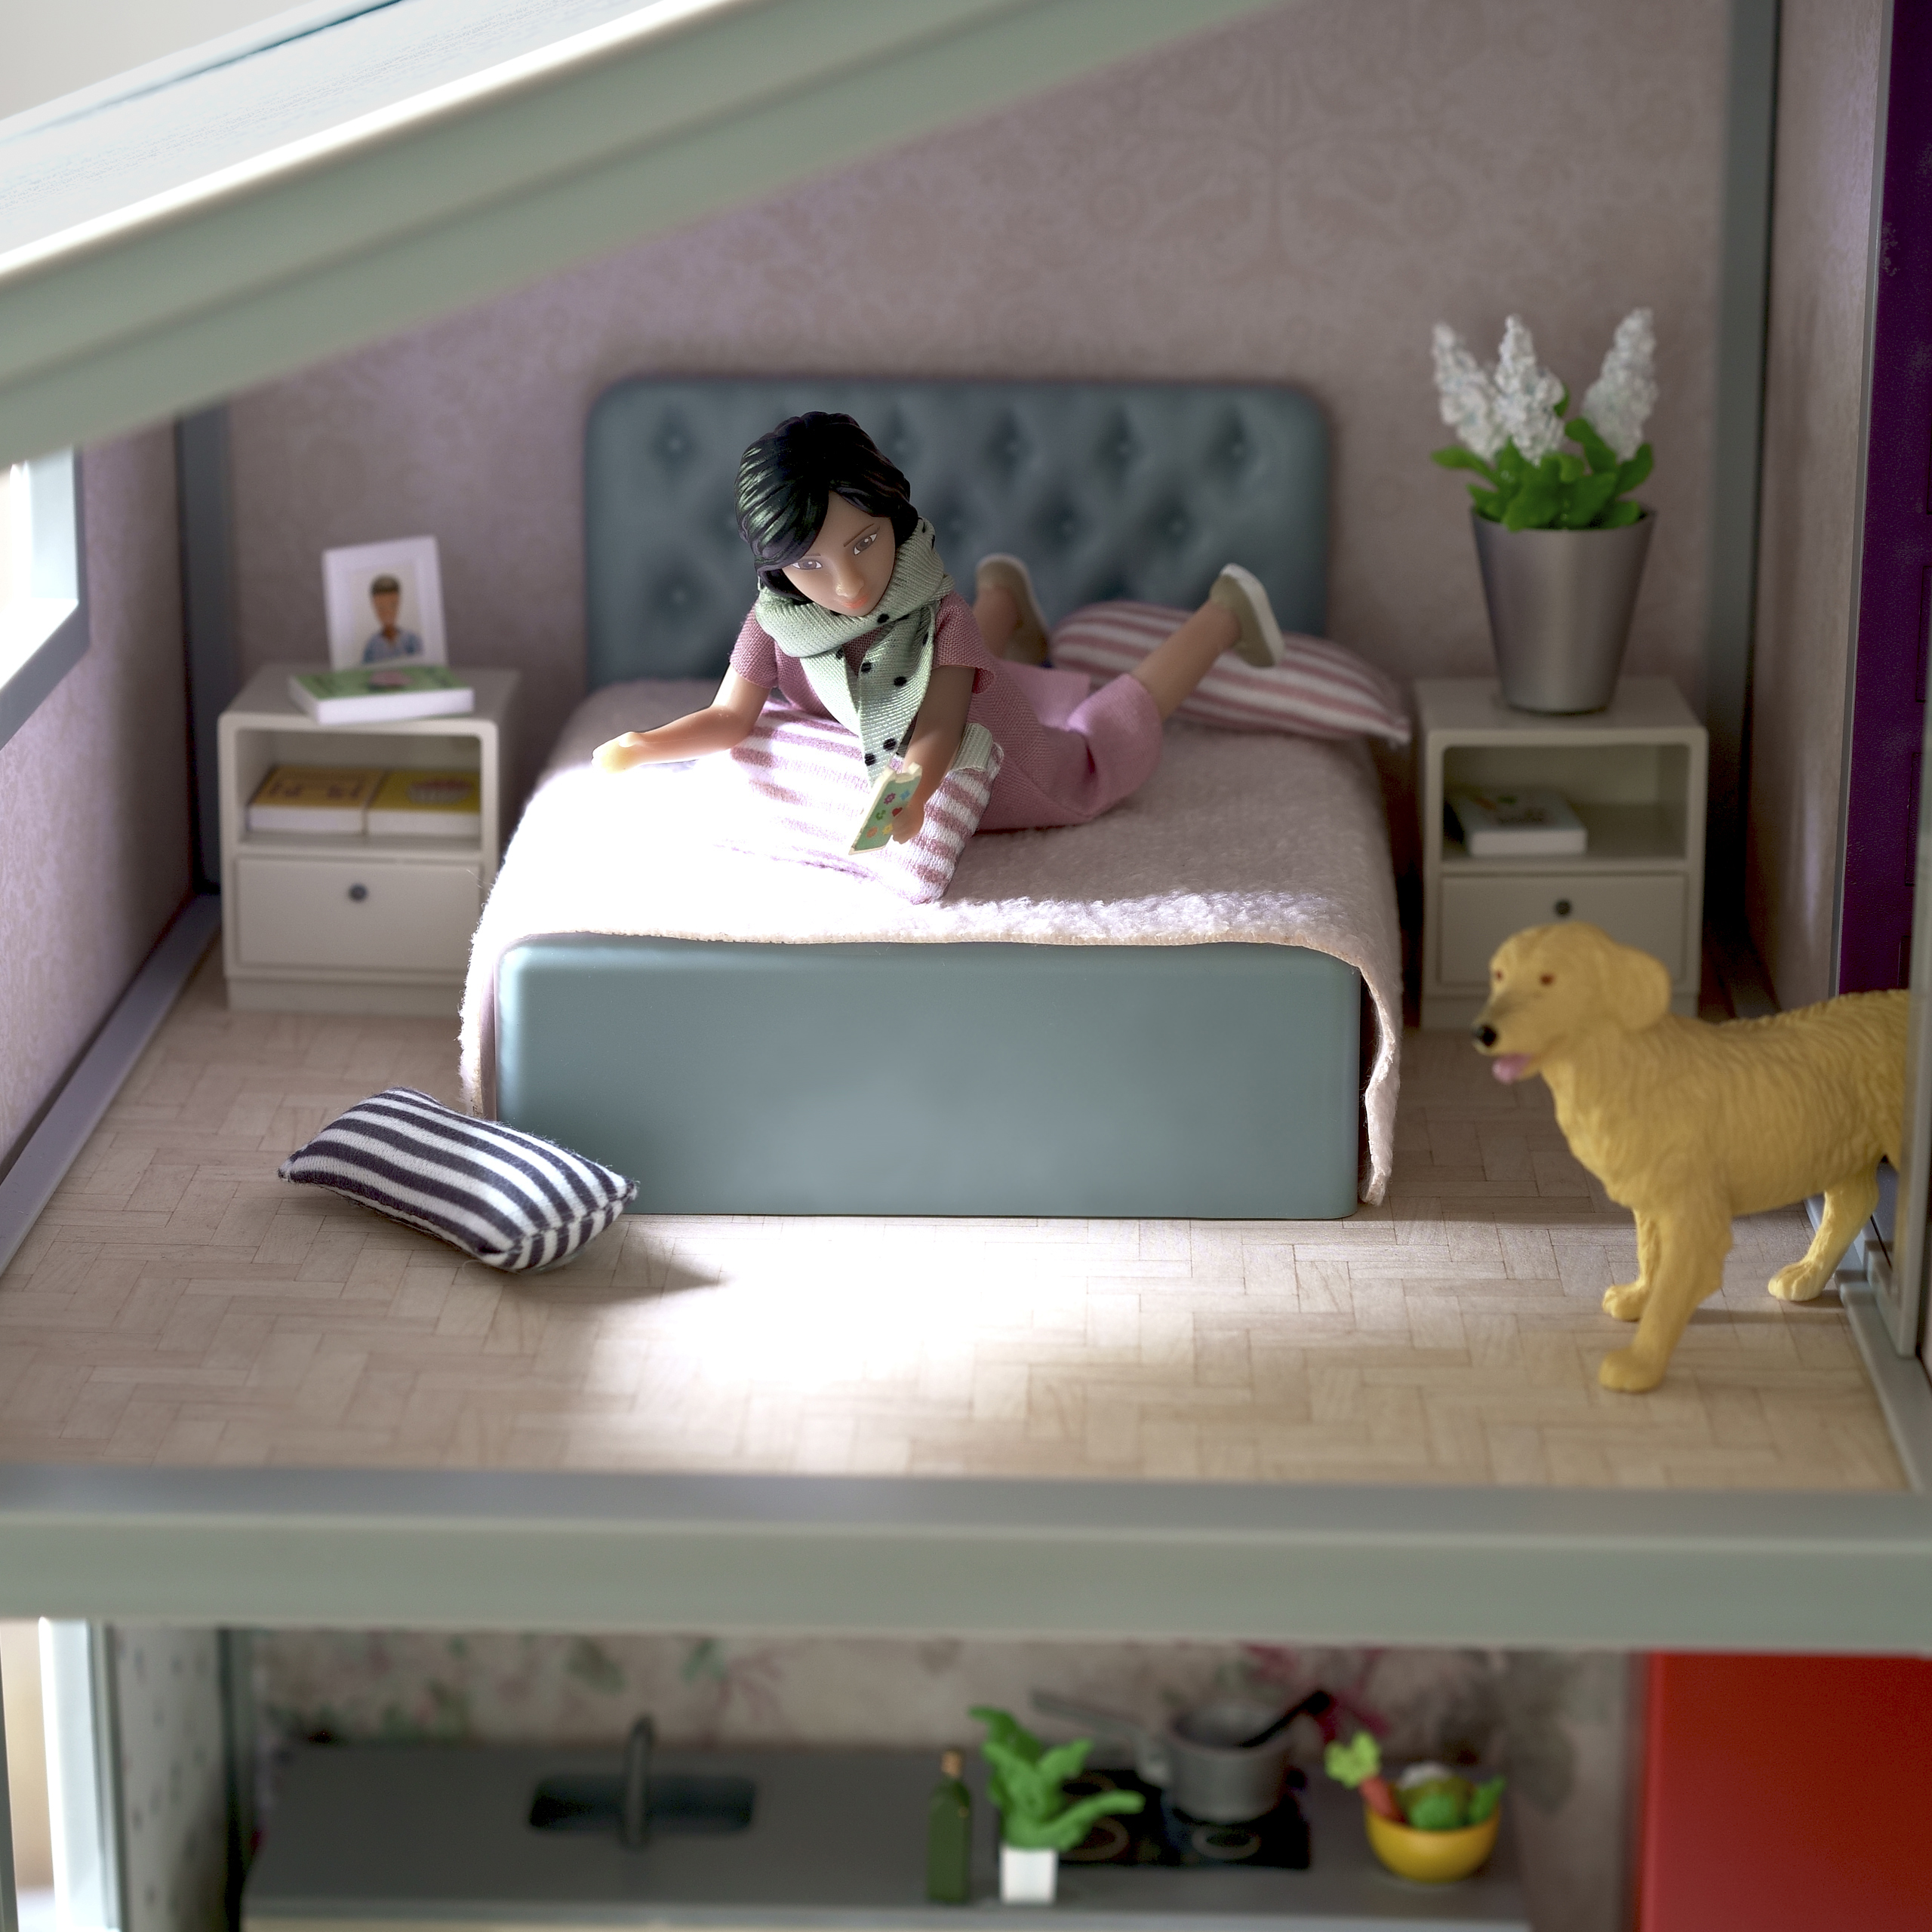 Doll house furniture & doll house accessories lundby dollhouse furniture bedroom set basic